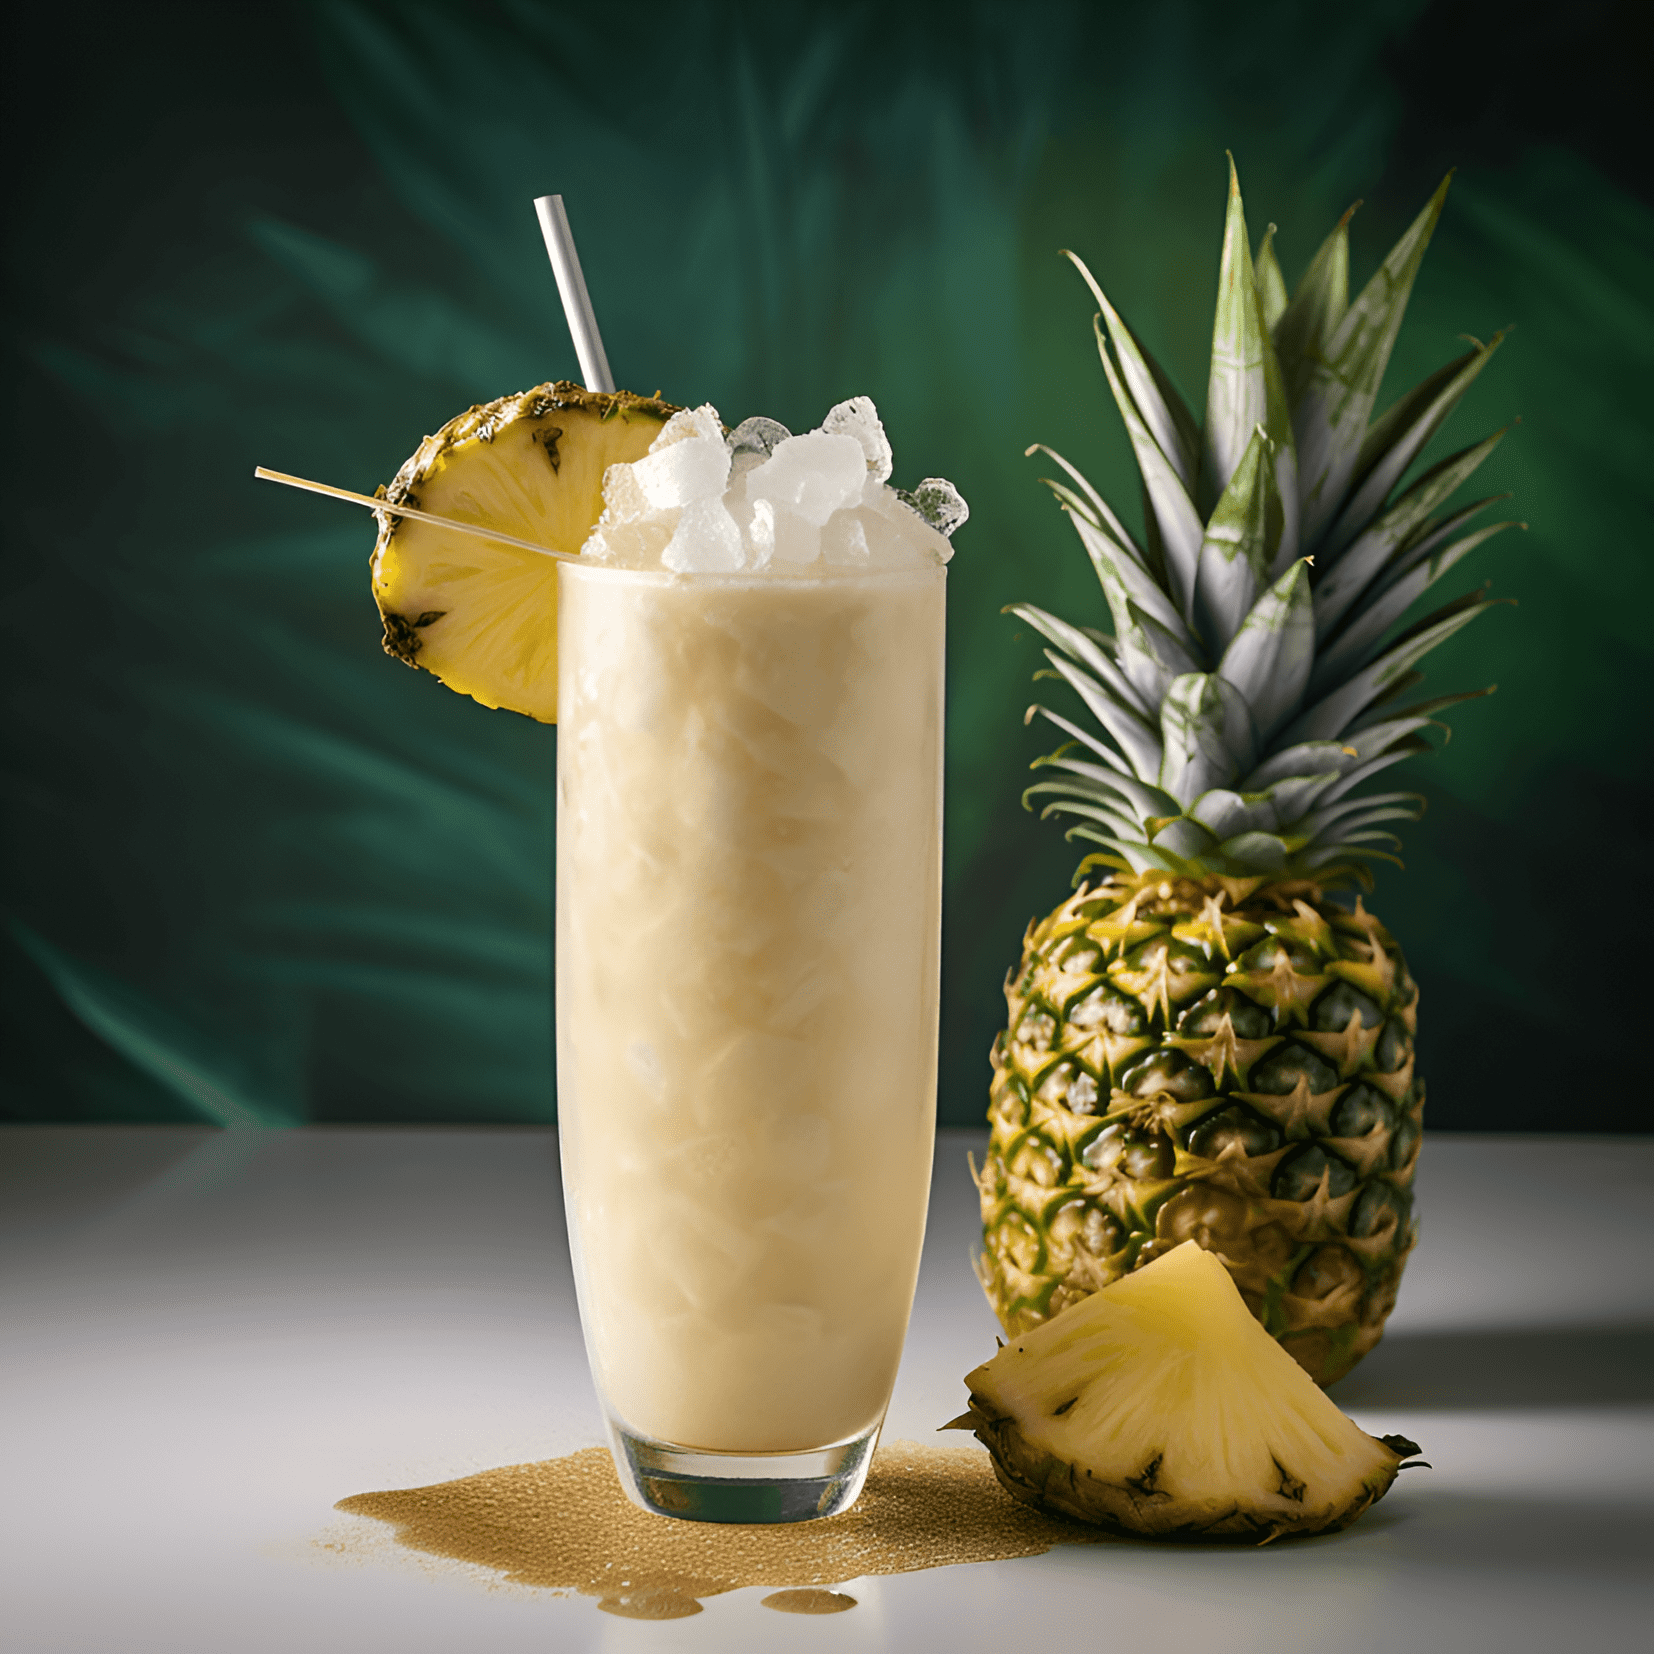 Coconut Cooler Cocktail Recipe - The Coconut Cooler has a sweet and creamy taste, with a hint of tartness from the pineapple juice. The coconut milk gives it a smooth and velvety texture, while the rum adds a subtle warmth and depth of flavor.